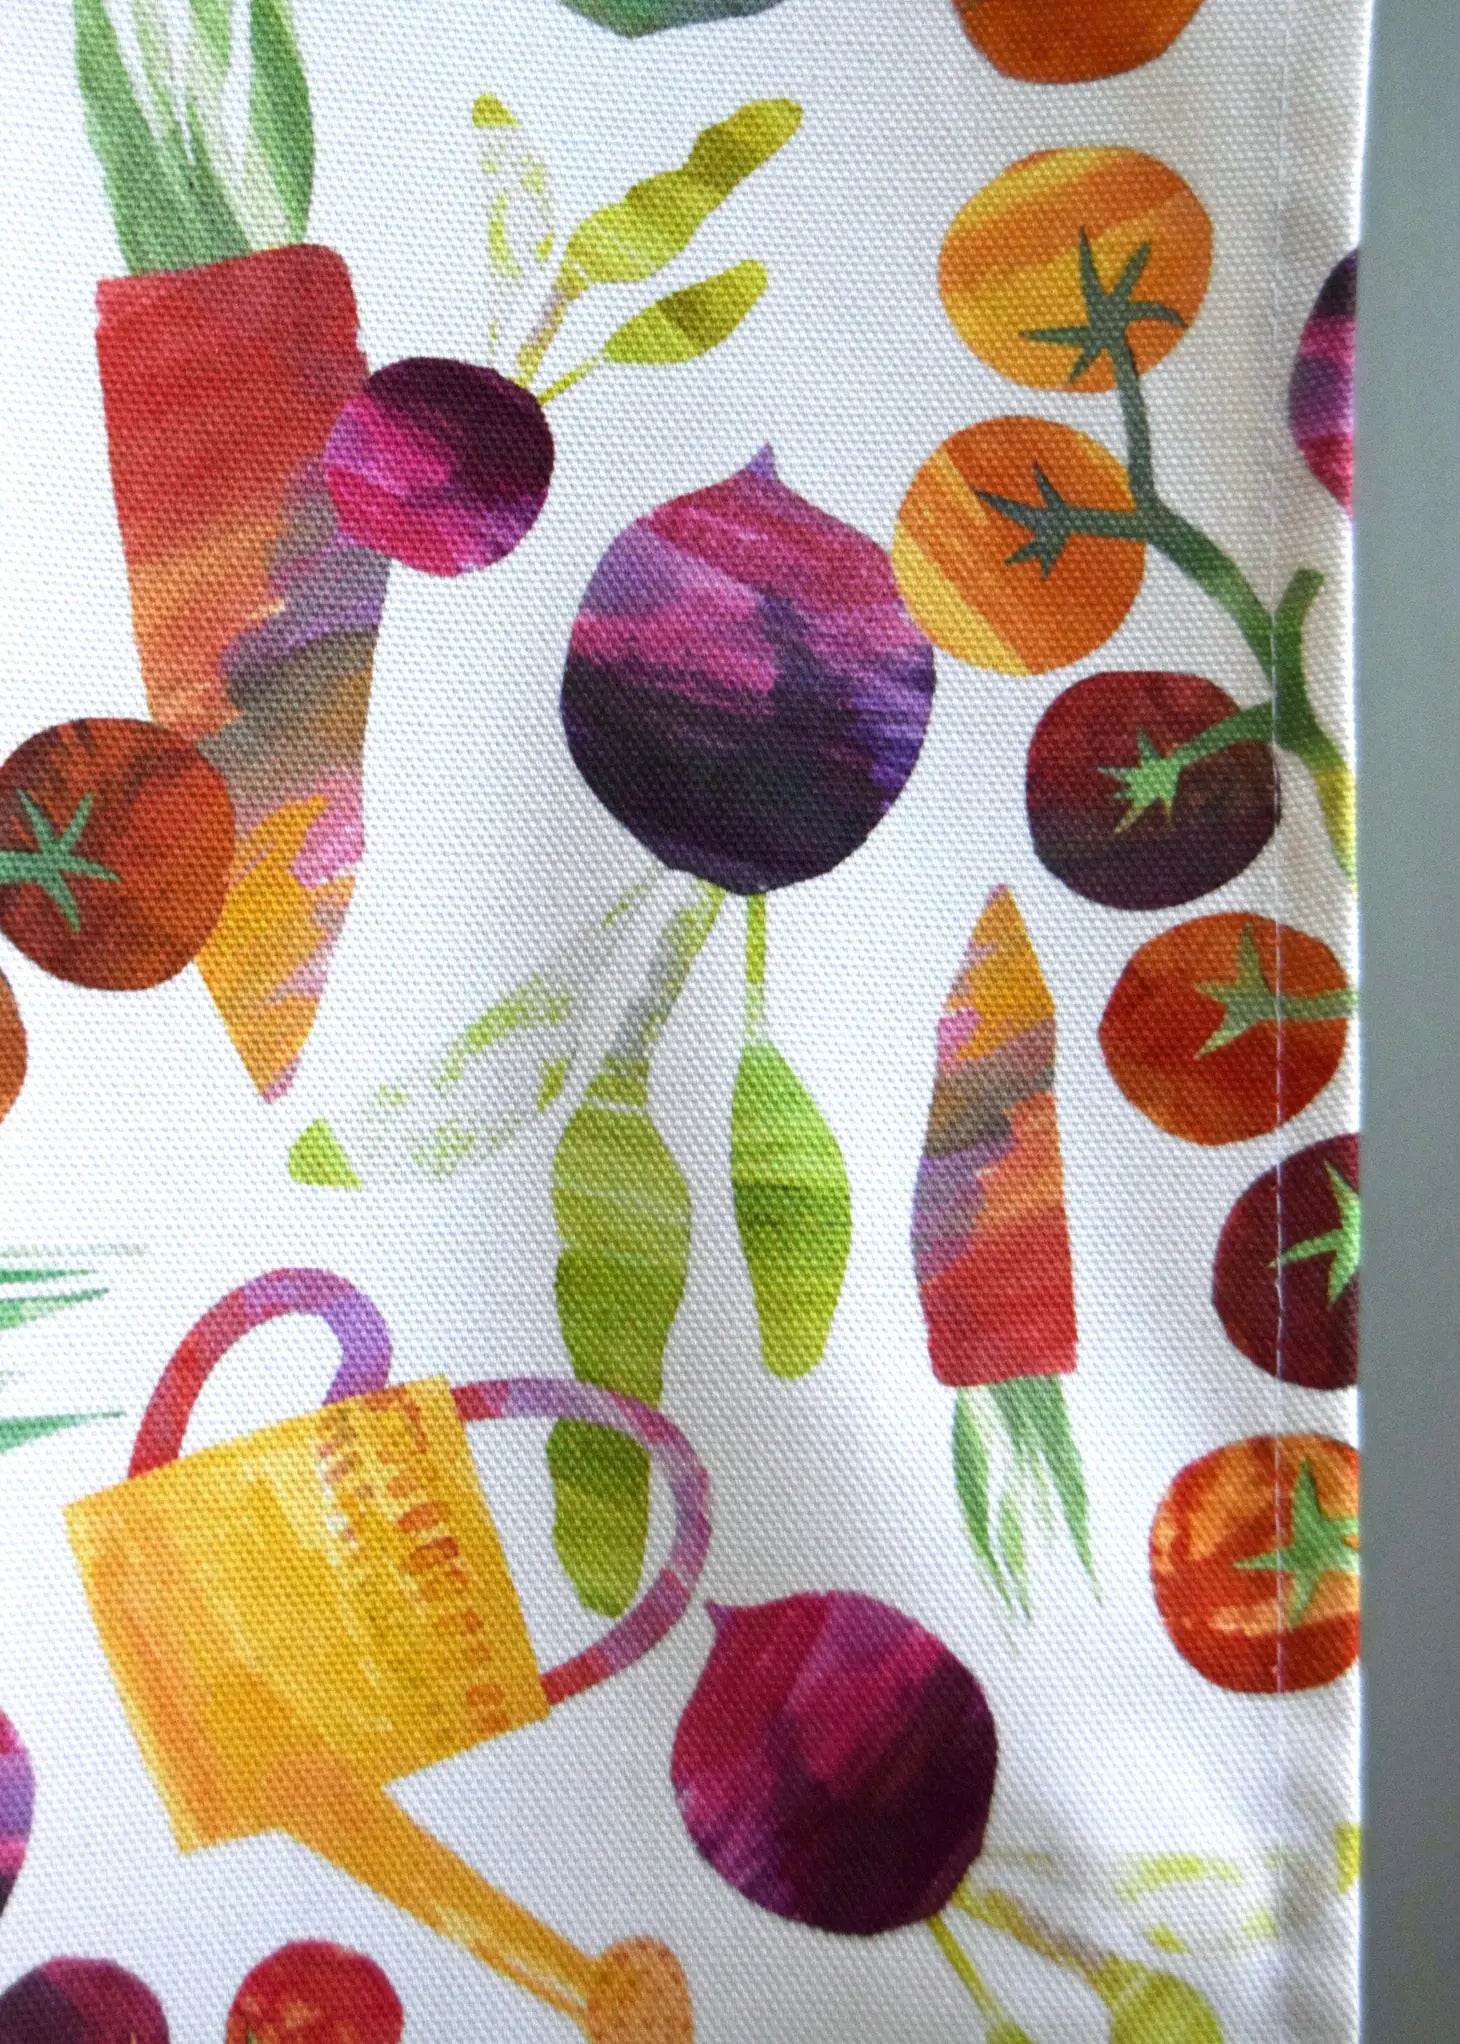 close up of the garden veggies and watering can design 